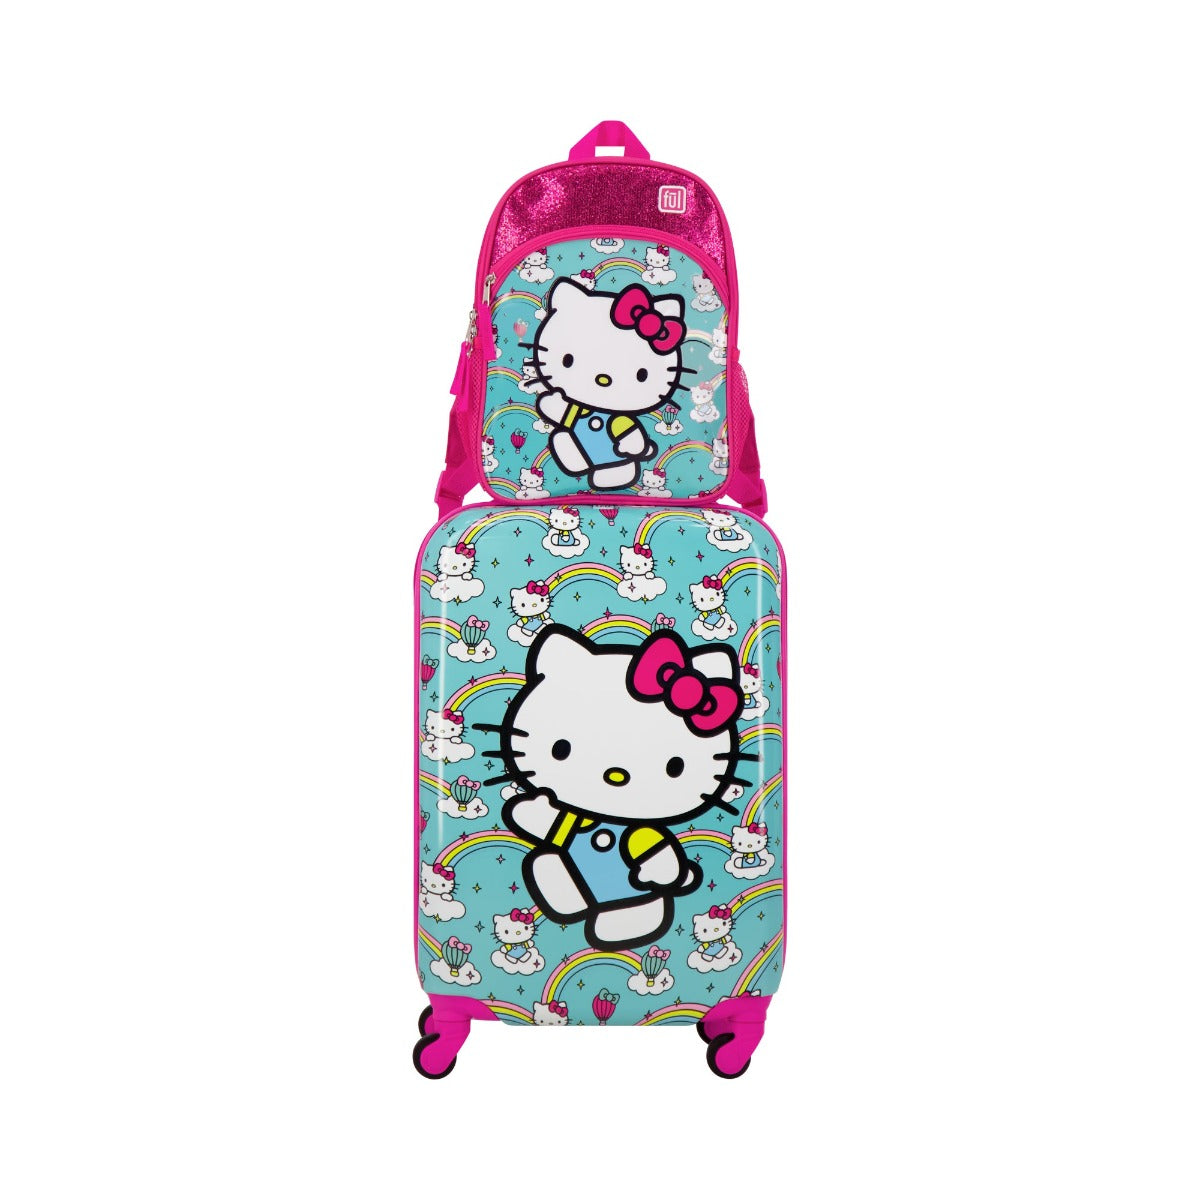 Hello Kitty Ful Rainbows matching 2 piece set with 21" suitcase 13" backpack for kids